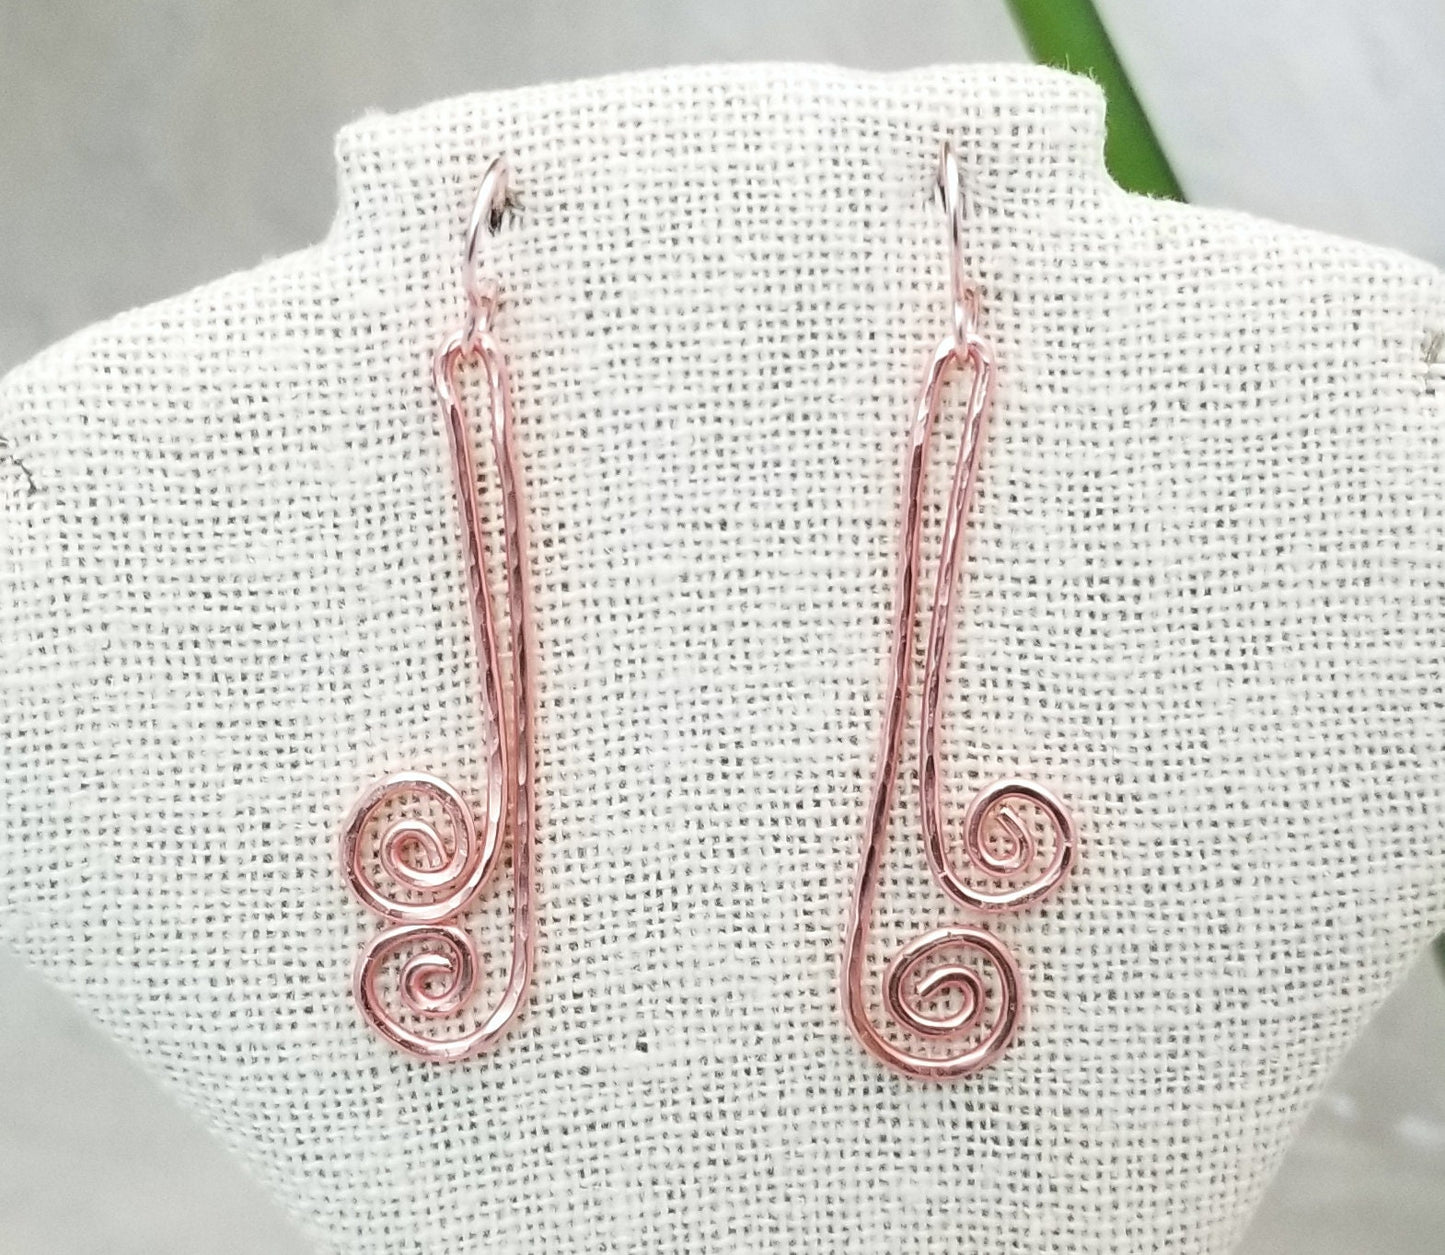 Hammered Spiral Wire Earrings, Long, Art Deco, Modern, Simple, Wedding, Bridesmaid, Choice of Metals and Closure Types